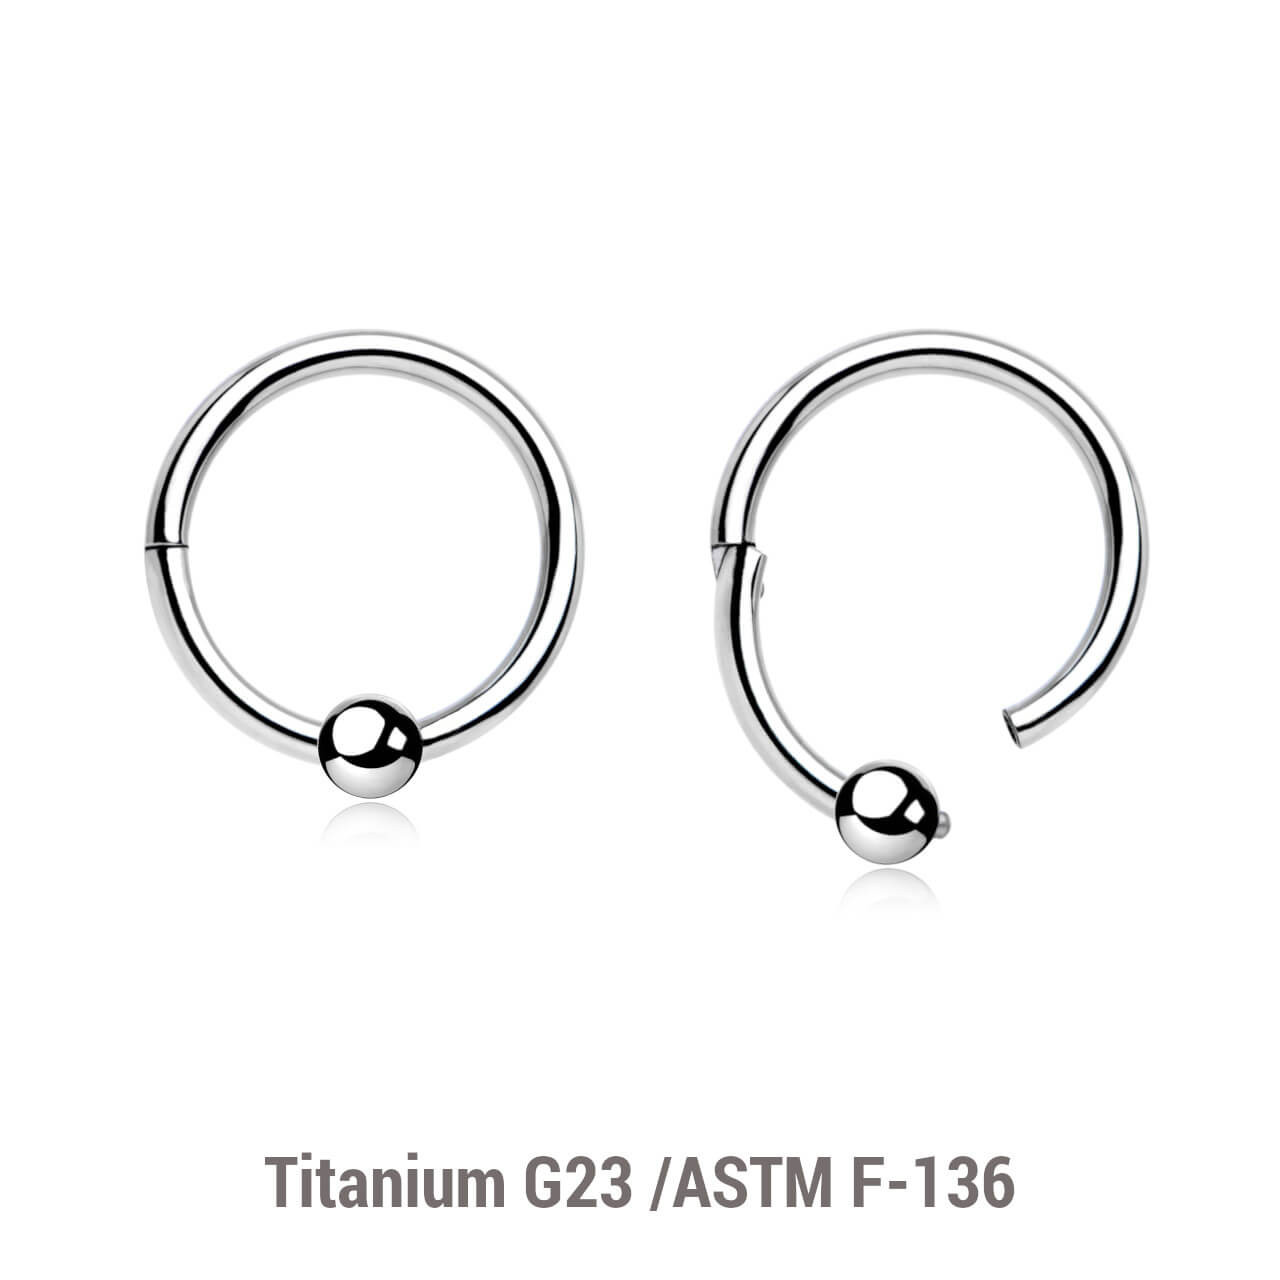 TBC12B3H Wholesale Pack of 5 Titanium G23 hinged ball closure rings, Thickness 1.2mm, Ball size 3mm